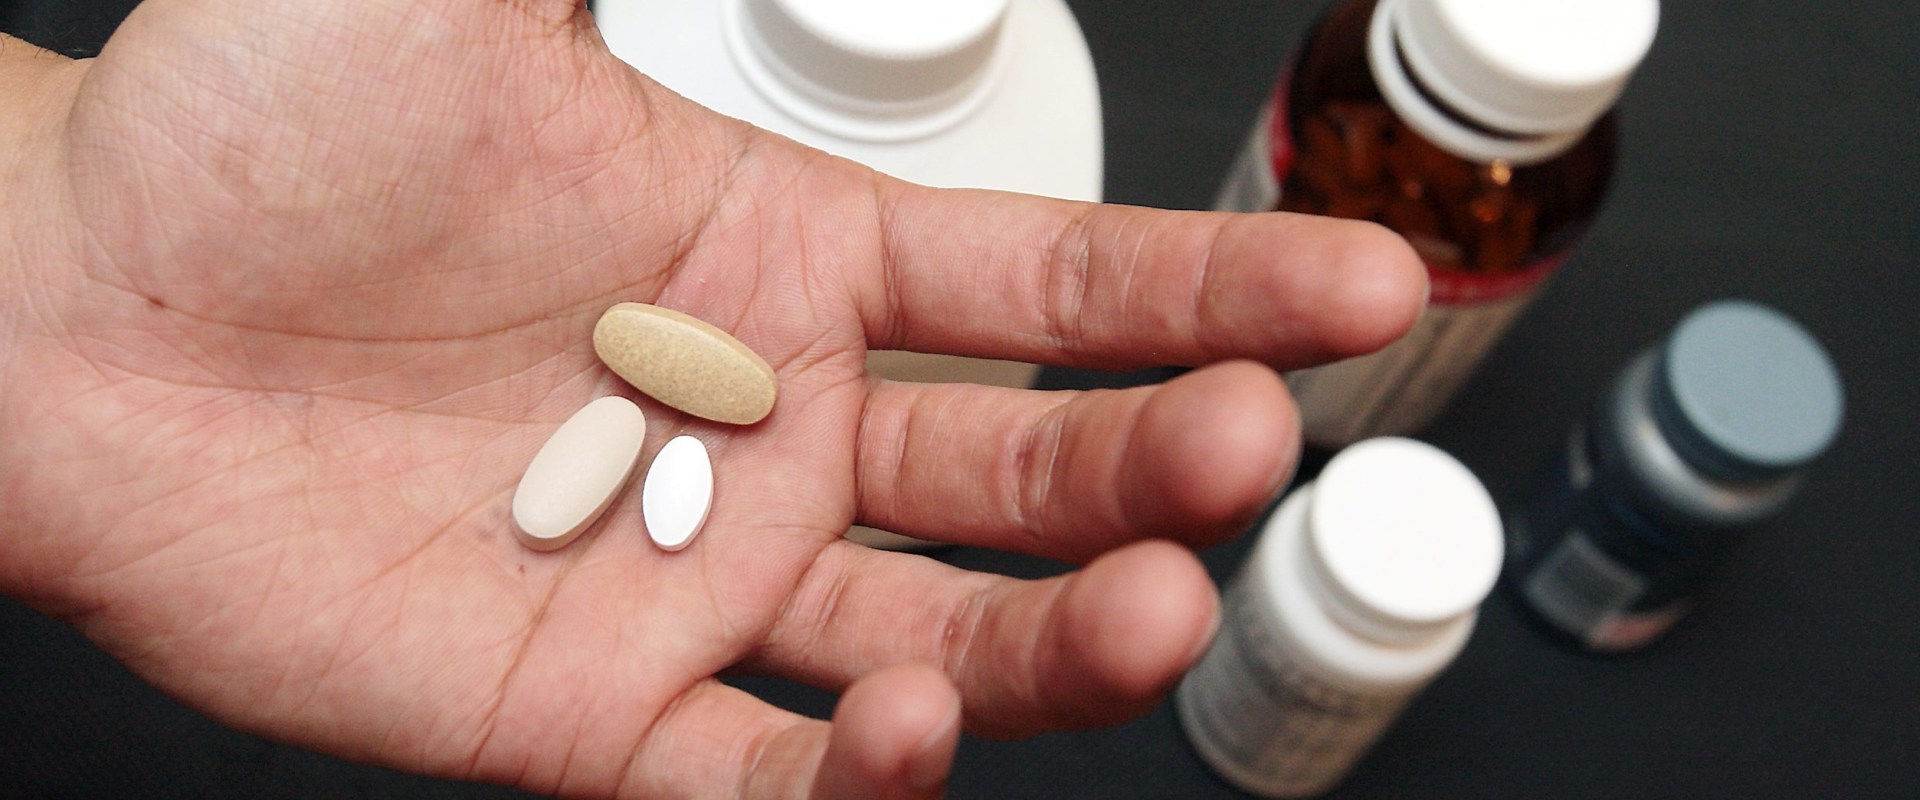 Are Your Supplements Working? How to Know for Sure